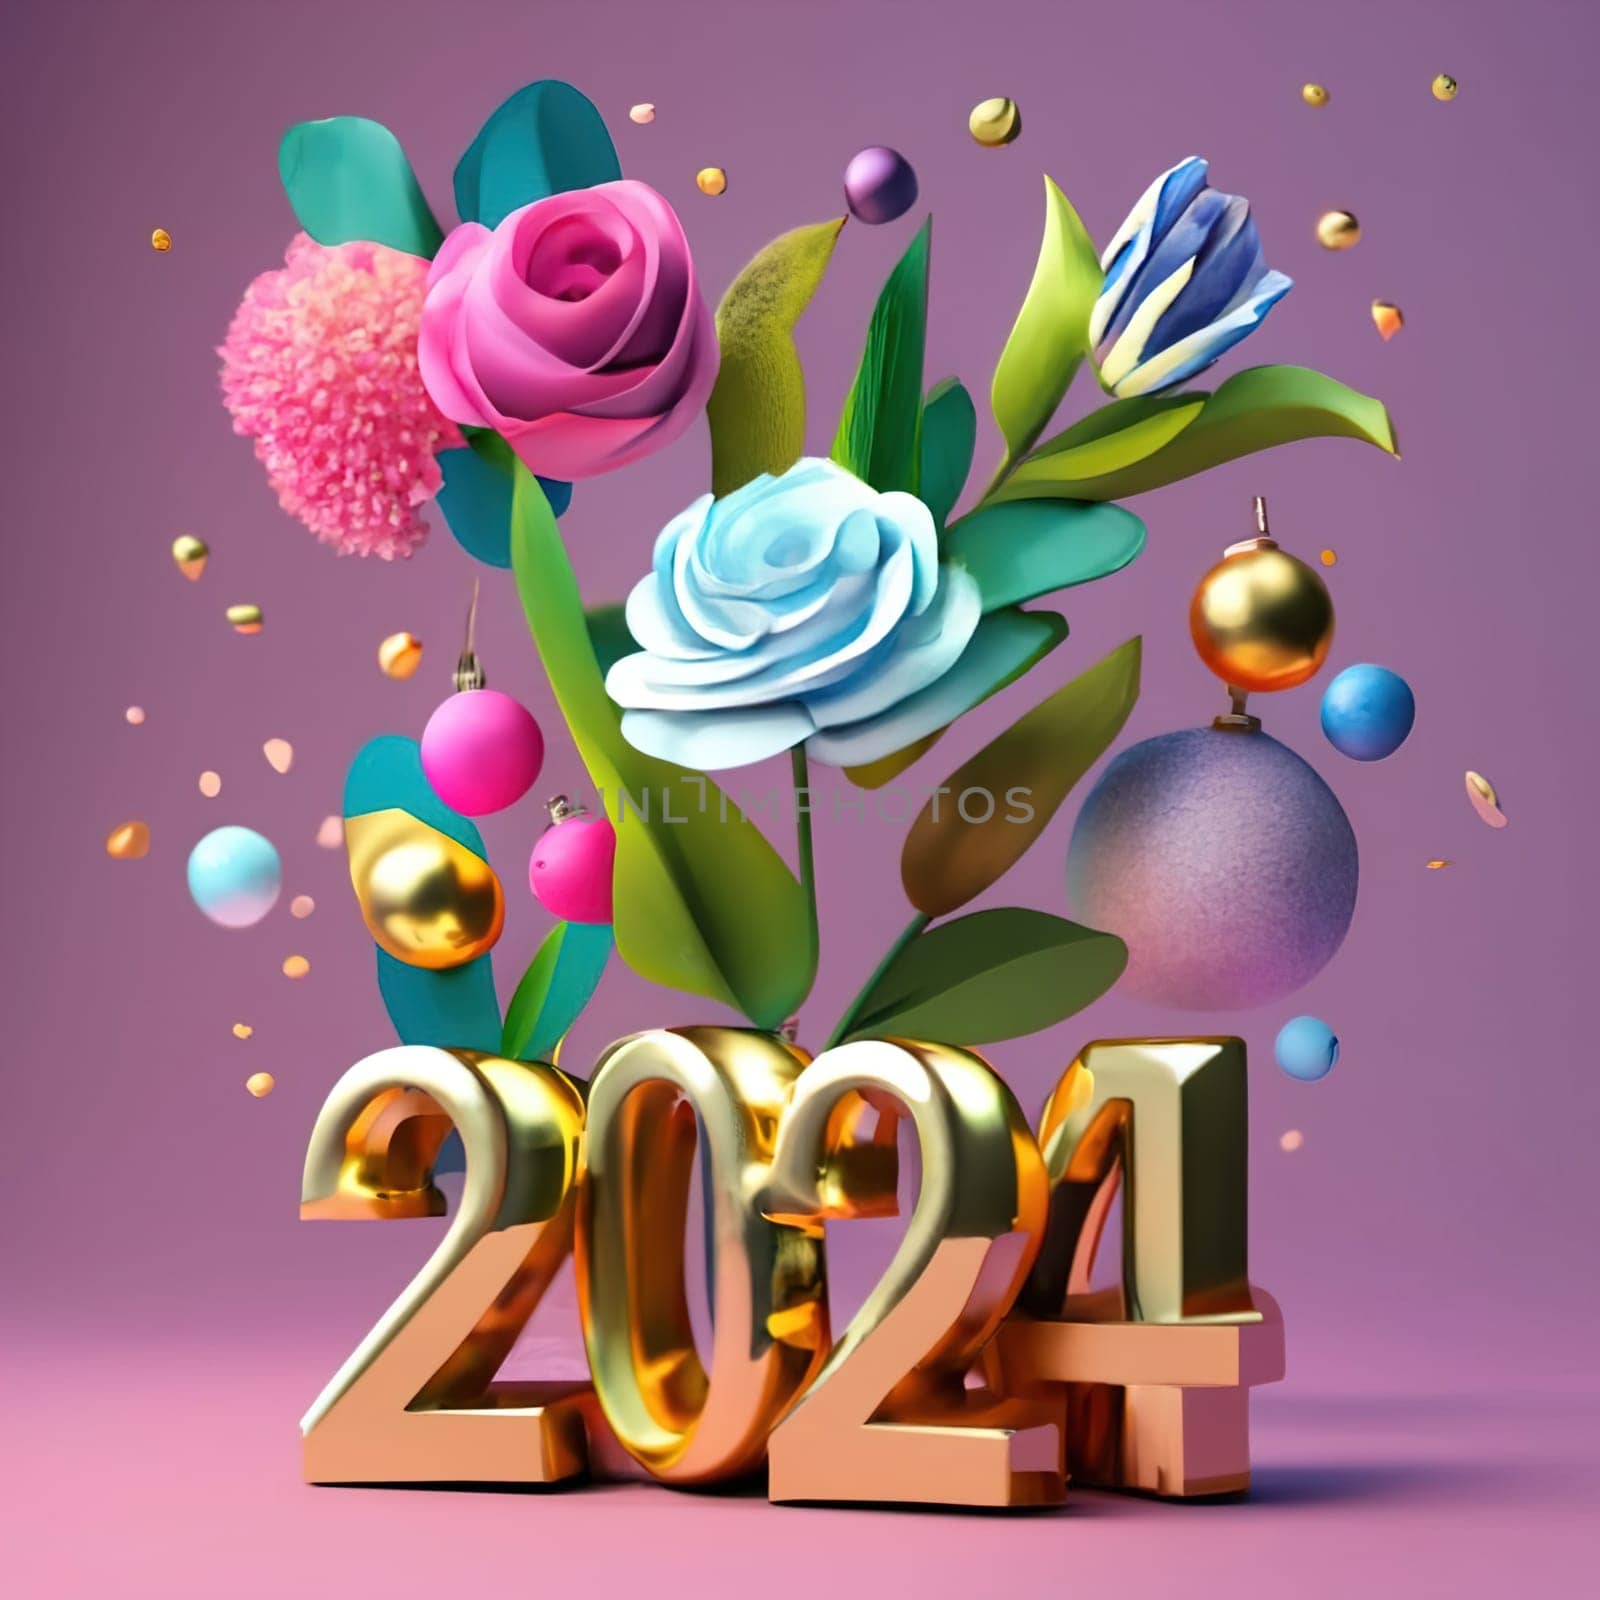 2024 Happy New Year Greeting Card - Vibrant Gold Conceptual Art in 3D Render with Stylish Typography and Fashion Illustration by igor010